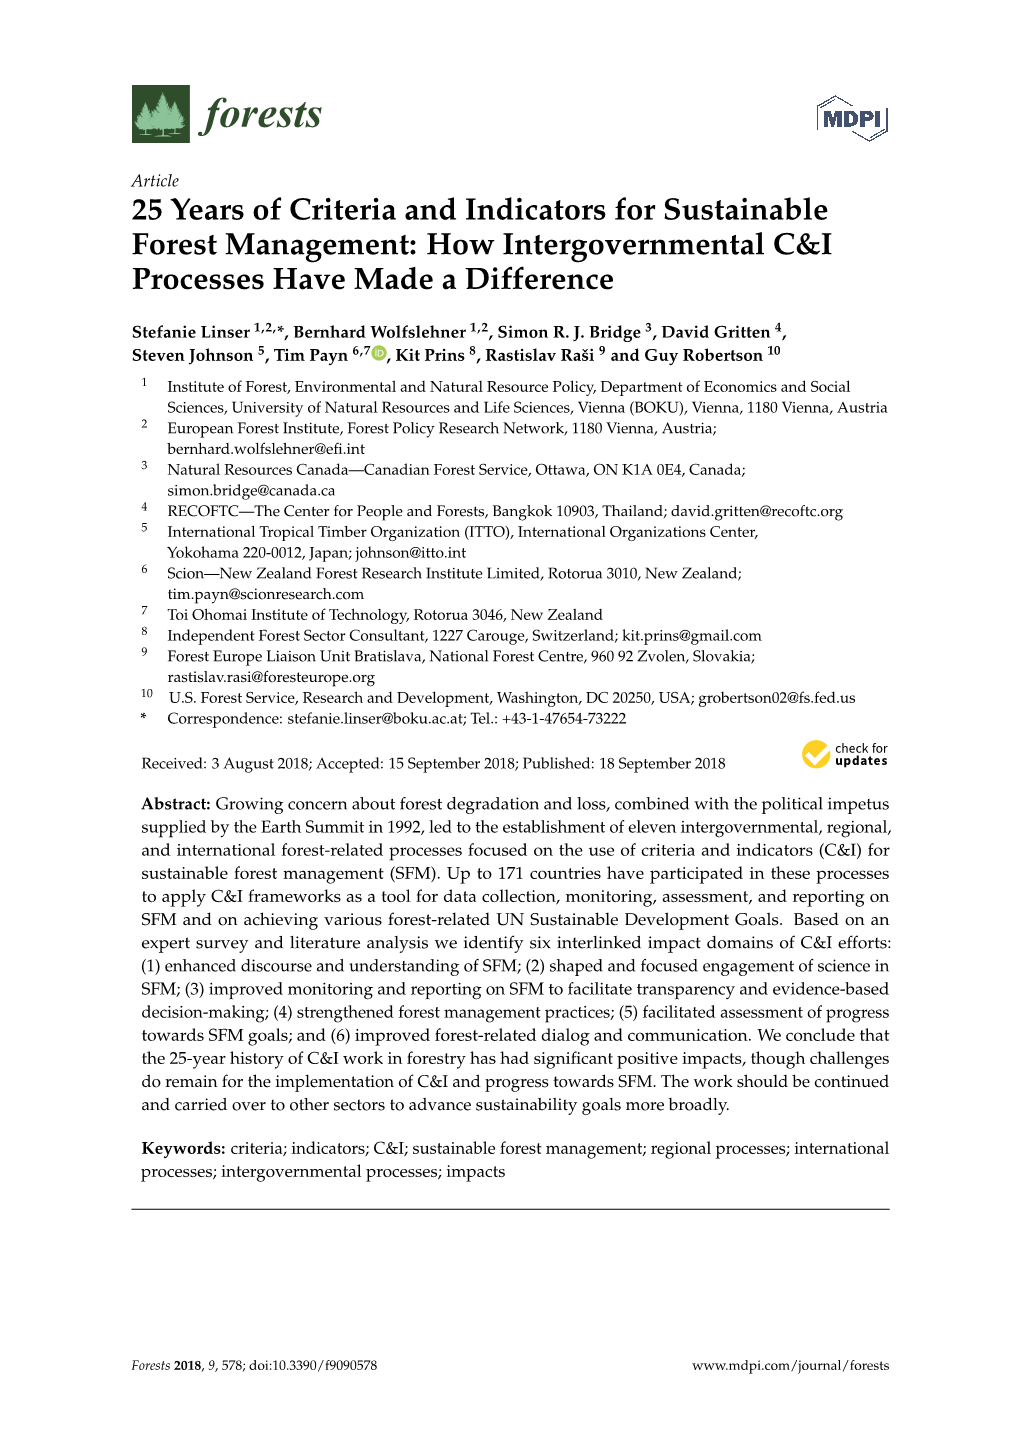 25 Years of Criteria and Indicators for Sustainable Forest Management: How Intergovernmental C&I Processes Have Made a Difference